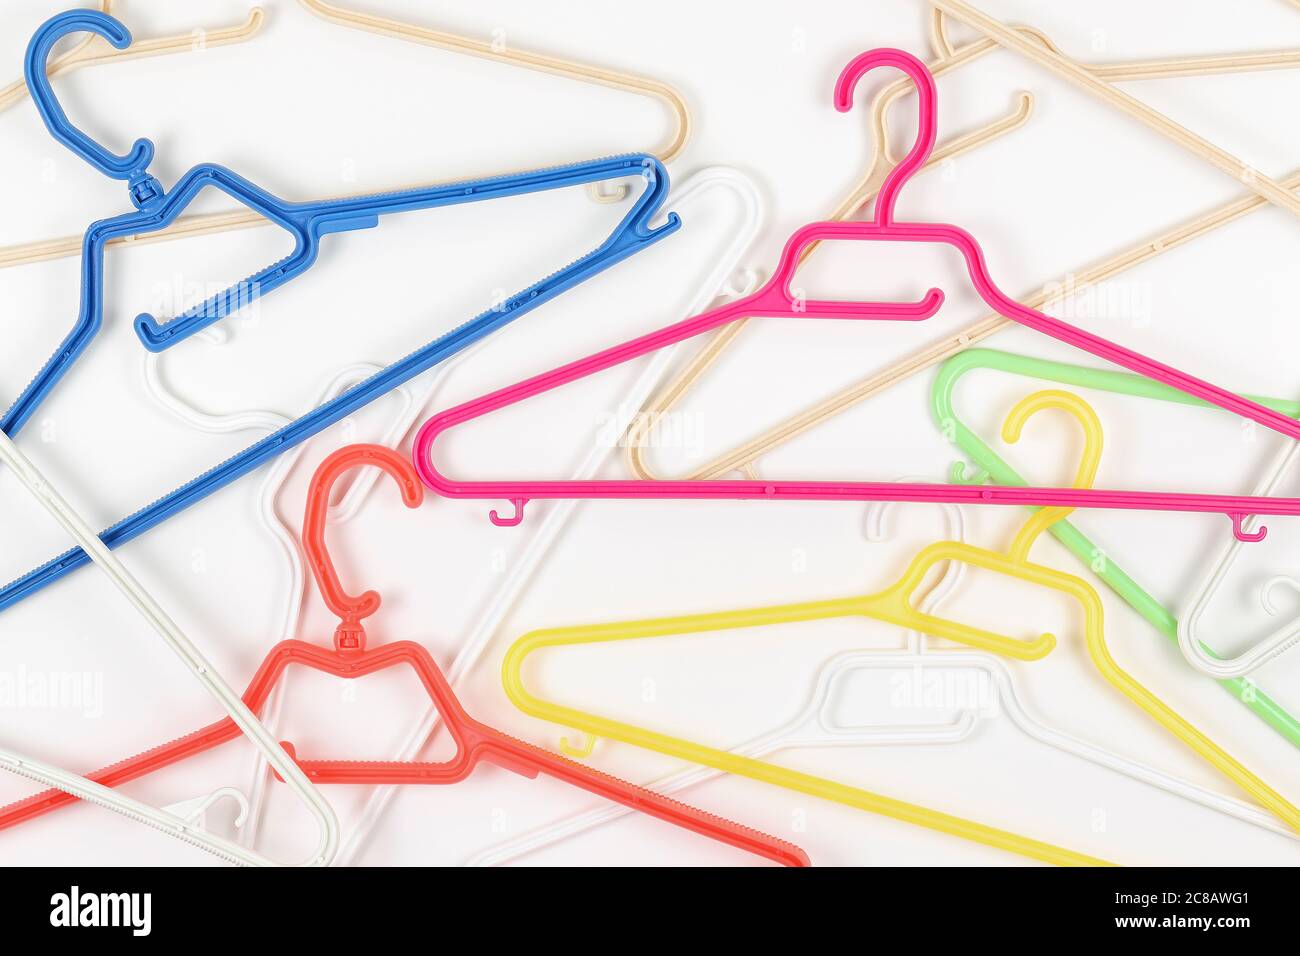 collection of colorful plastic hangers on white Stock Photo